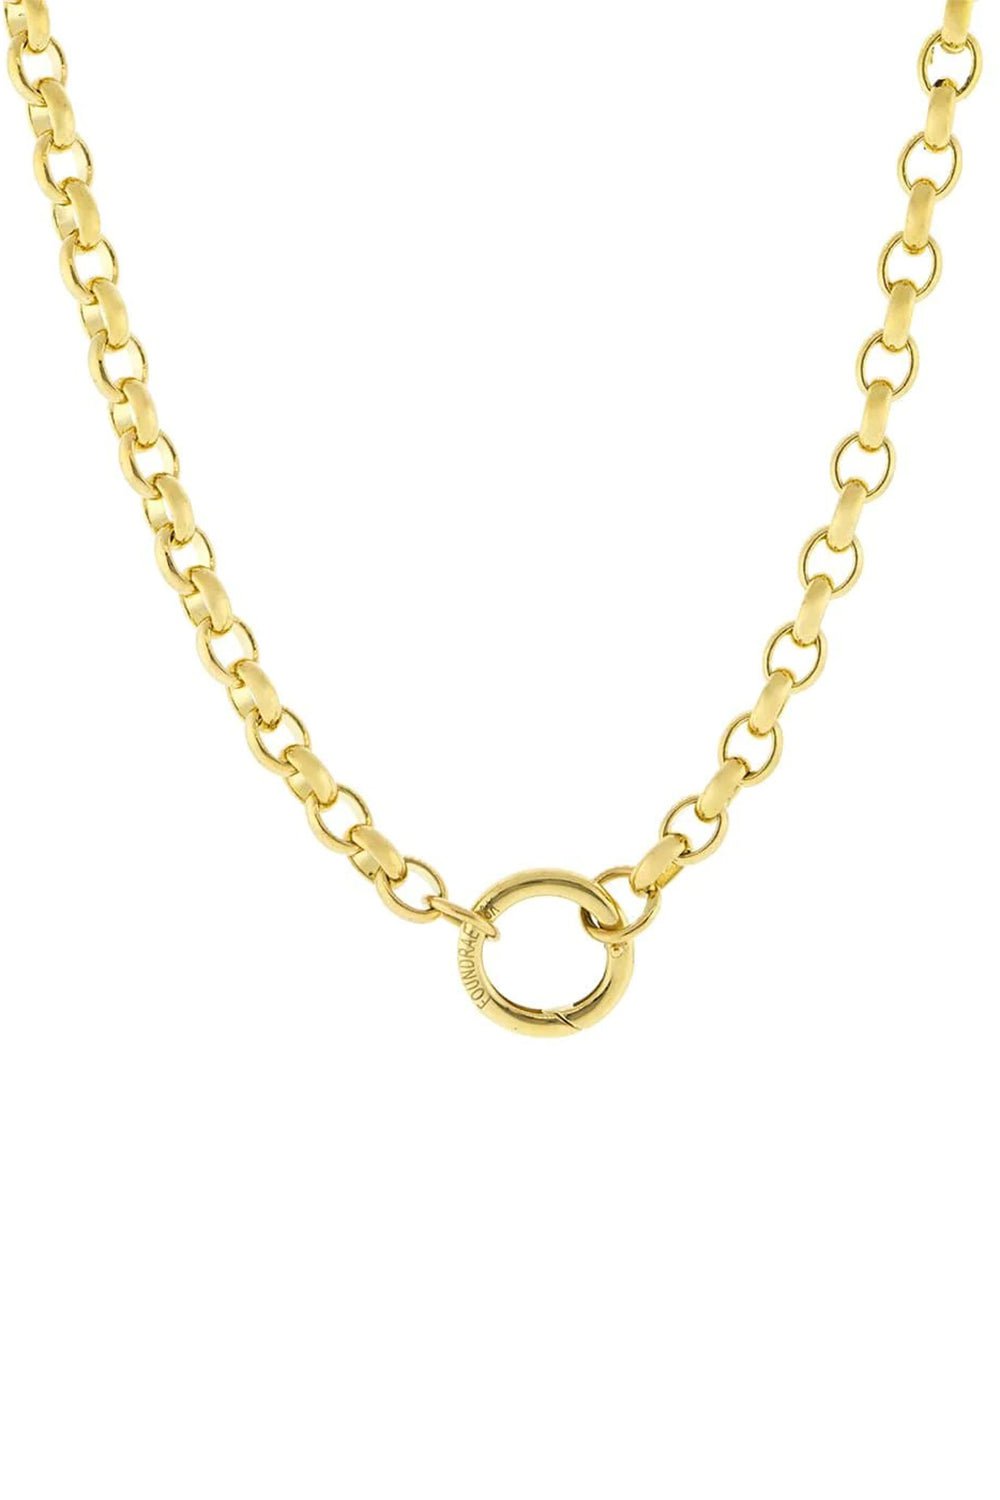 FOUNDRAE-Large Heavy Belcher Chain-YELLOW GOLD